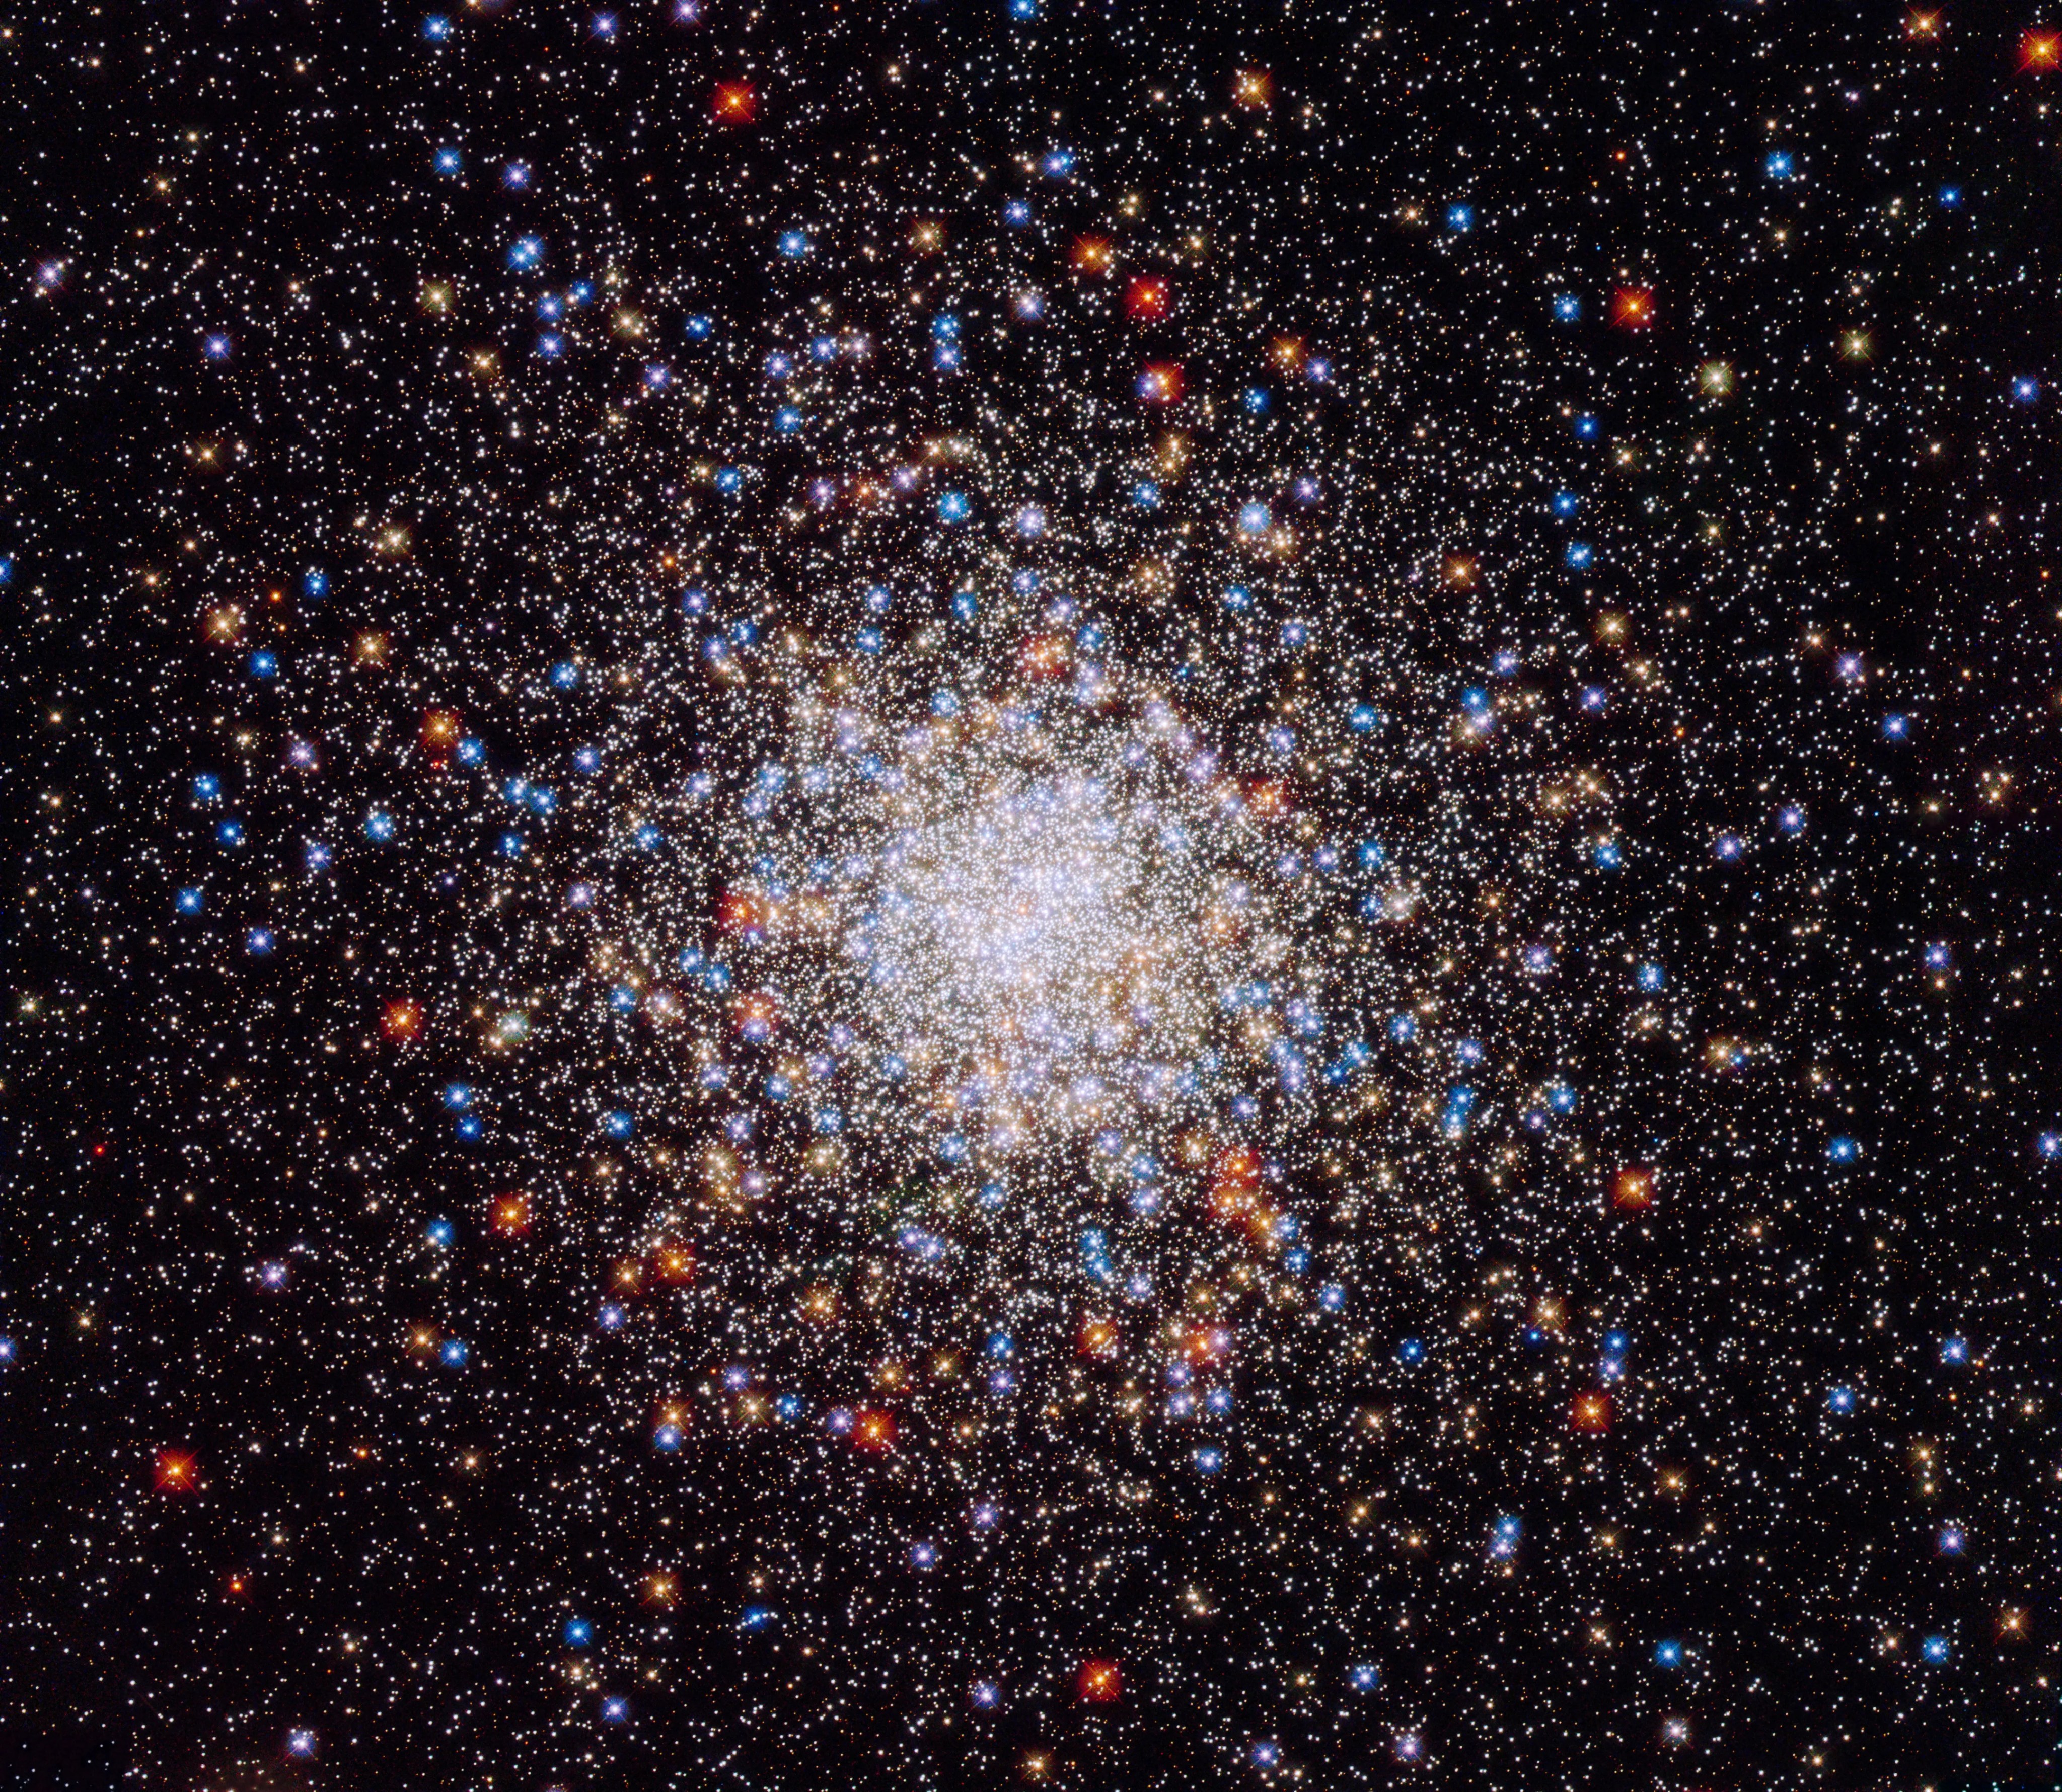 A bright, compact, spherical cluster of stars in colors of white, blue and red.